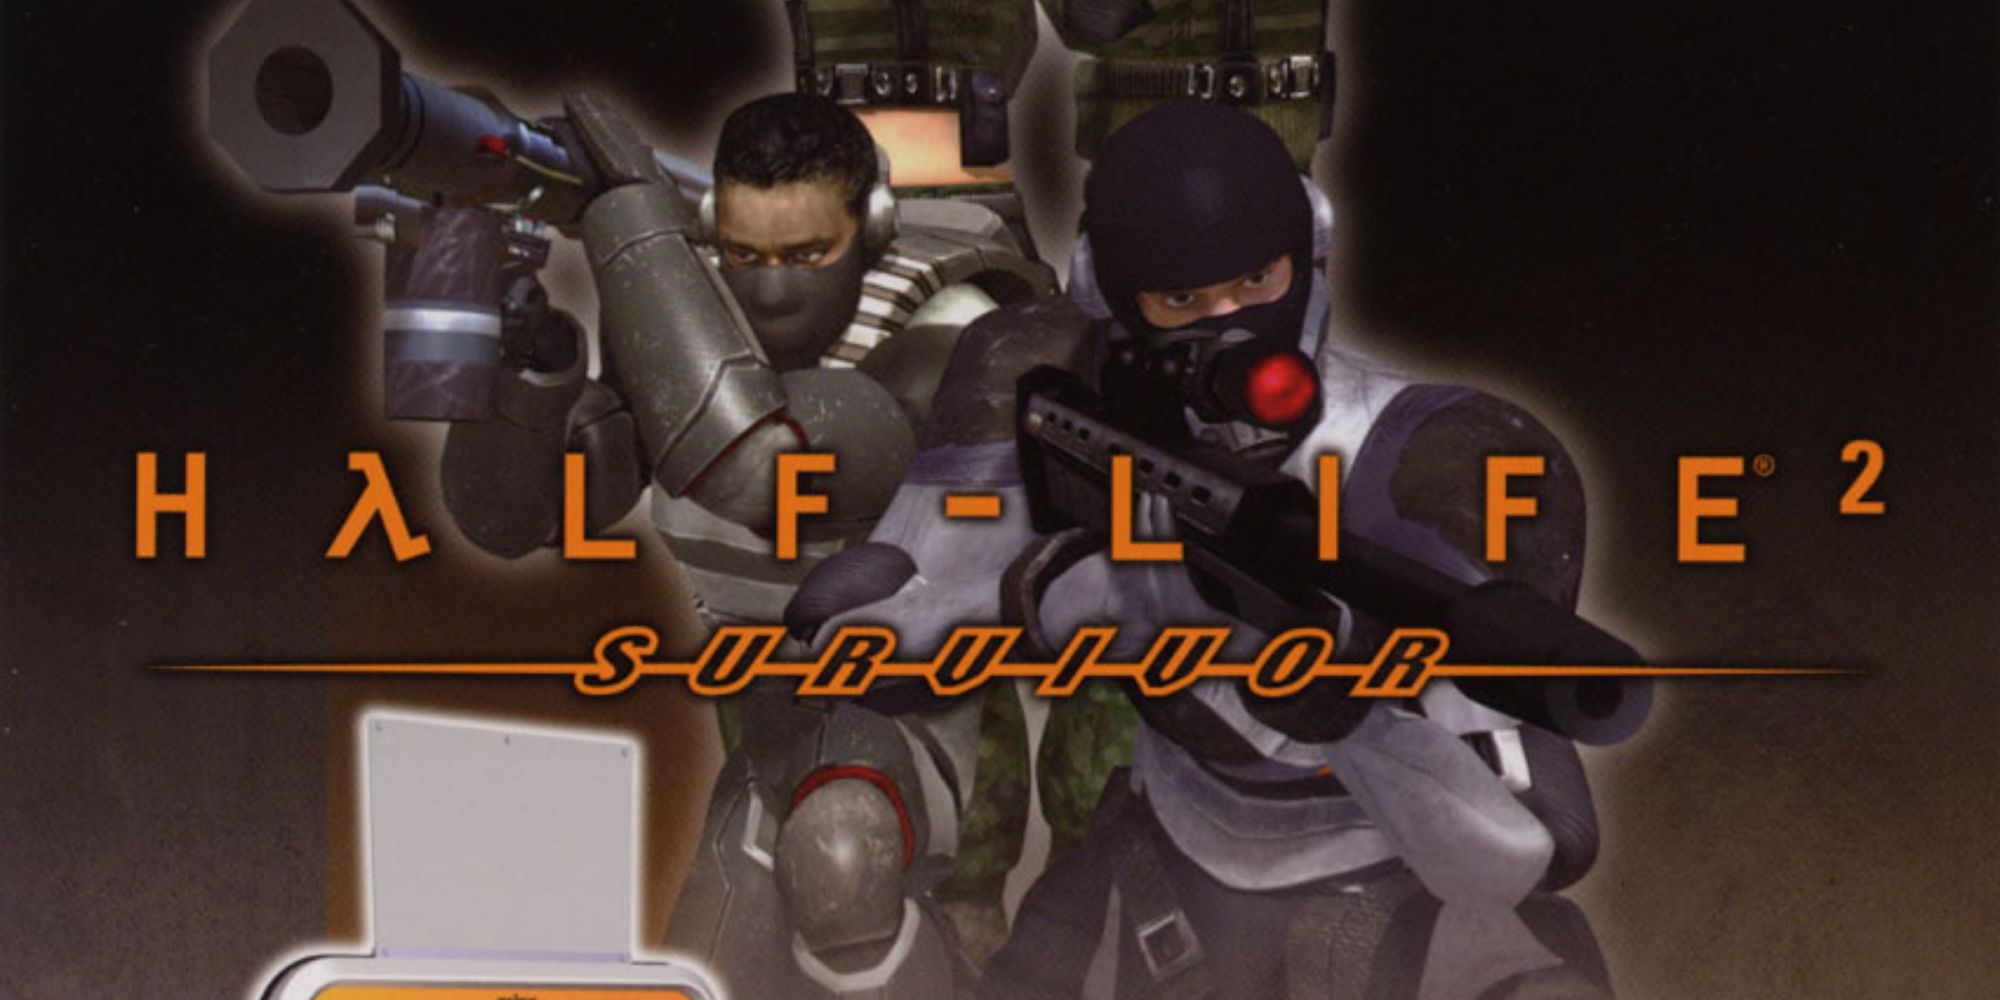 An advertisement for Half-Life 2: Survivor, showing characrters posing behind the game logo